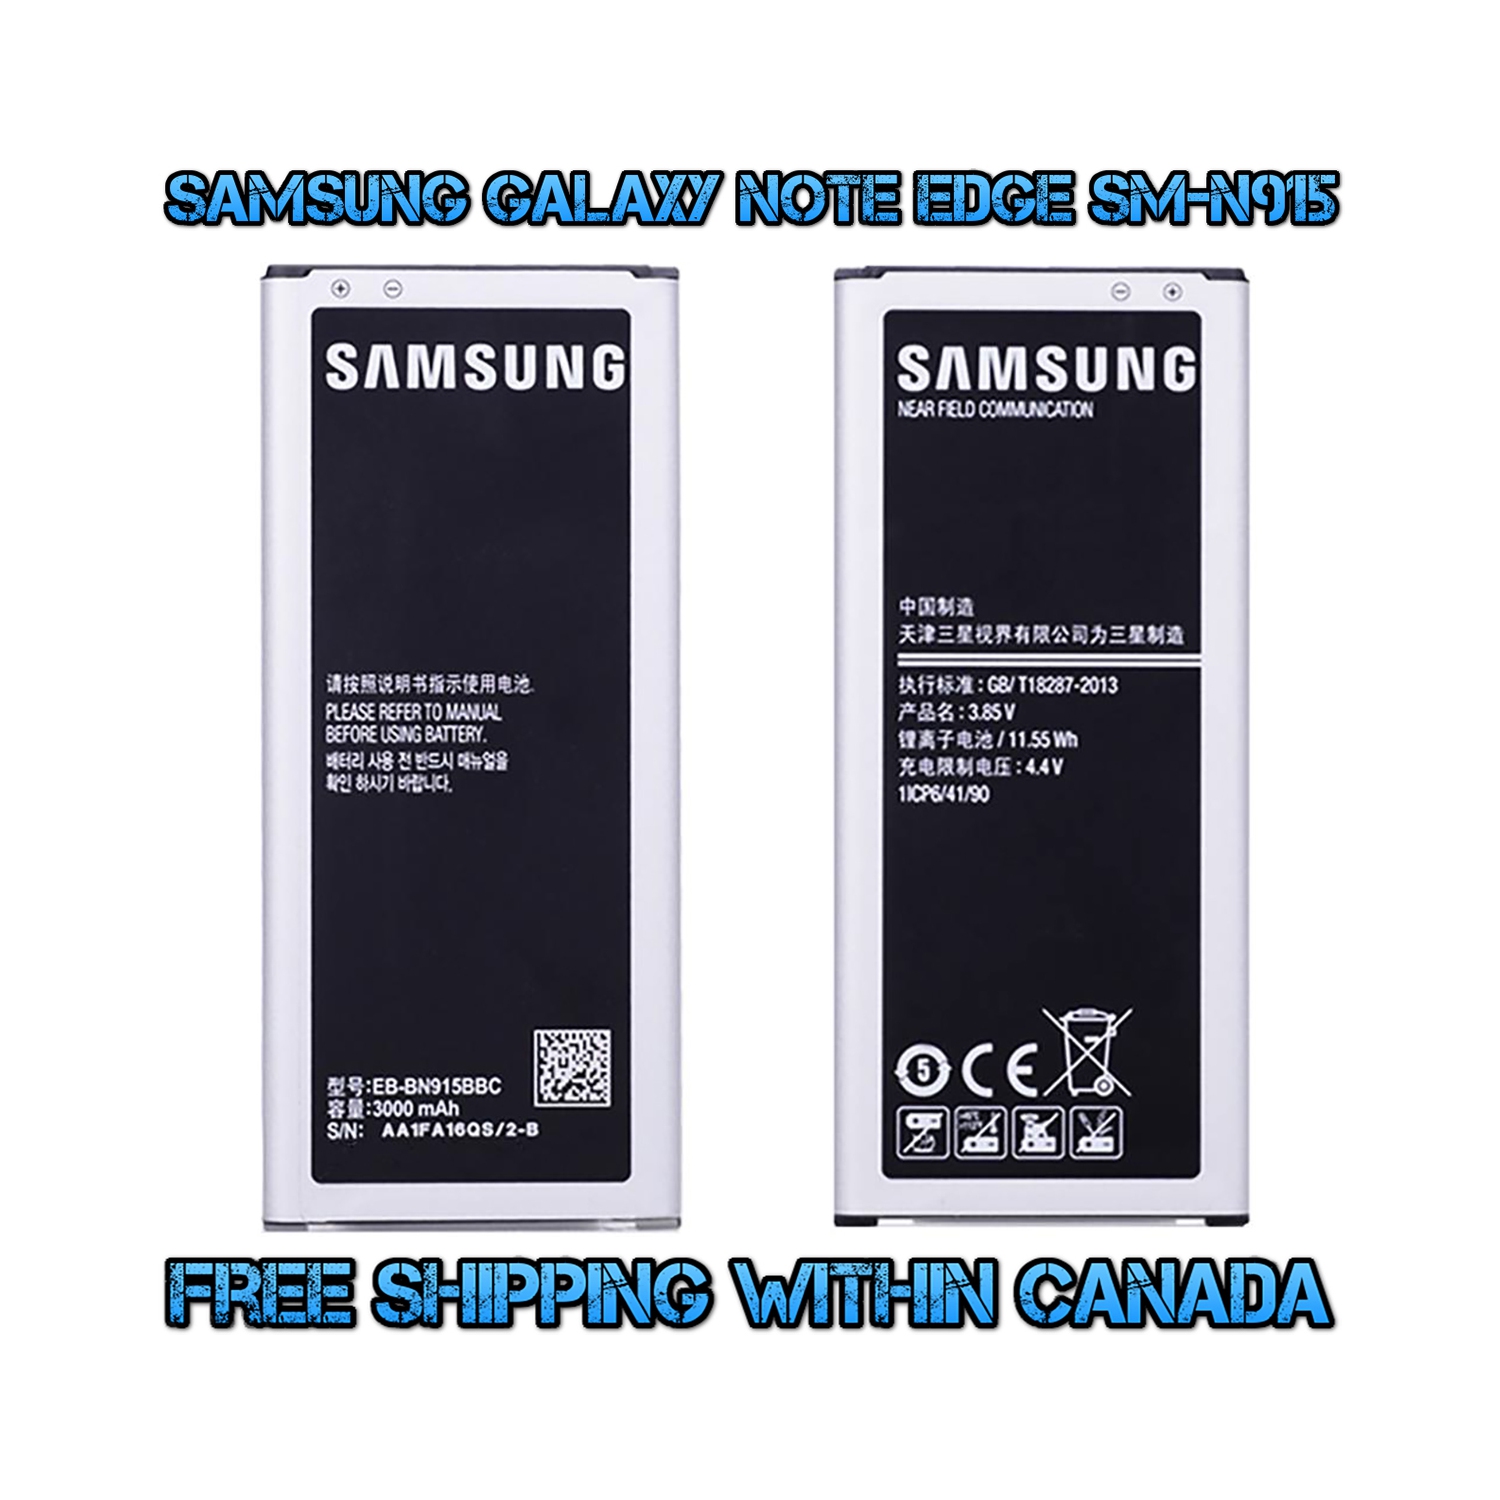 New OEM Replacement Battery Model EB-BN915BBC 3000 mAh for Samsung Galaxy Note Edge N915W8 N915 - (FREE SHIPPING)